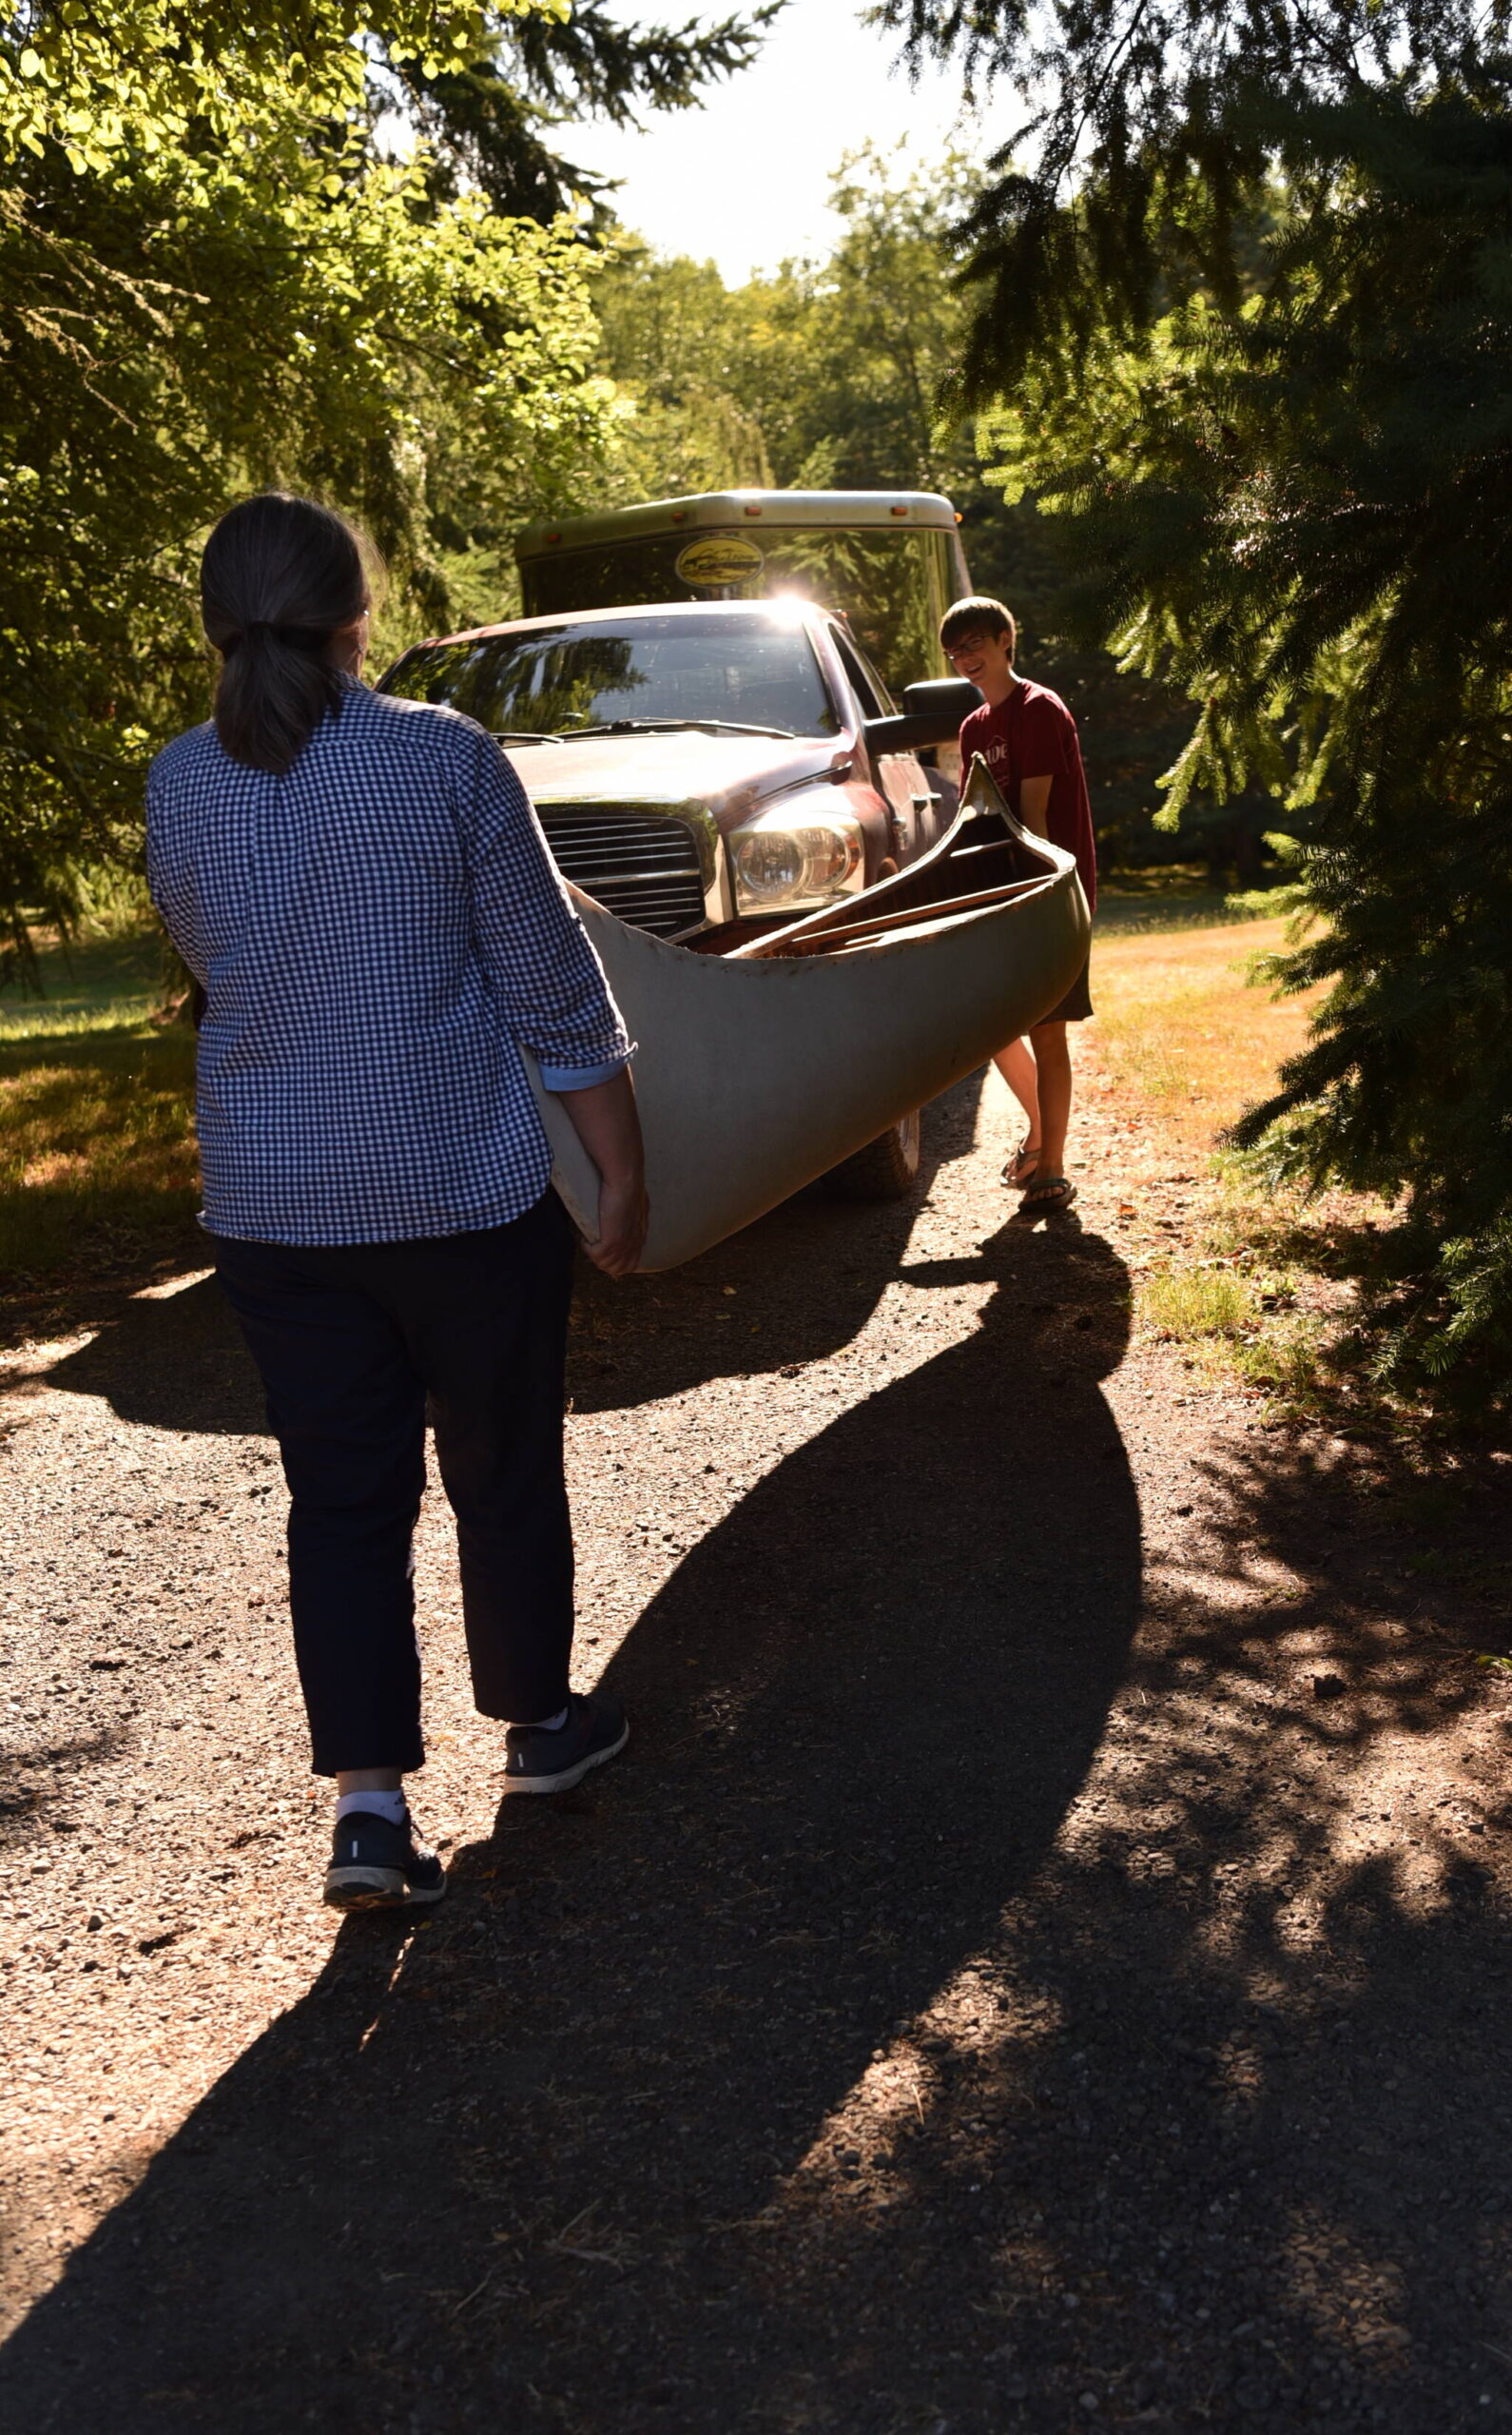 Carrie and Owen Nelson carry the 16-foot canoe to the horse trailer that will take it home to Montana.